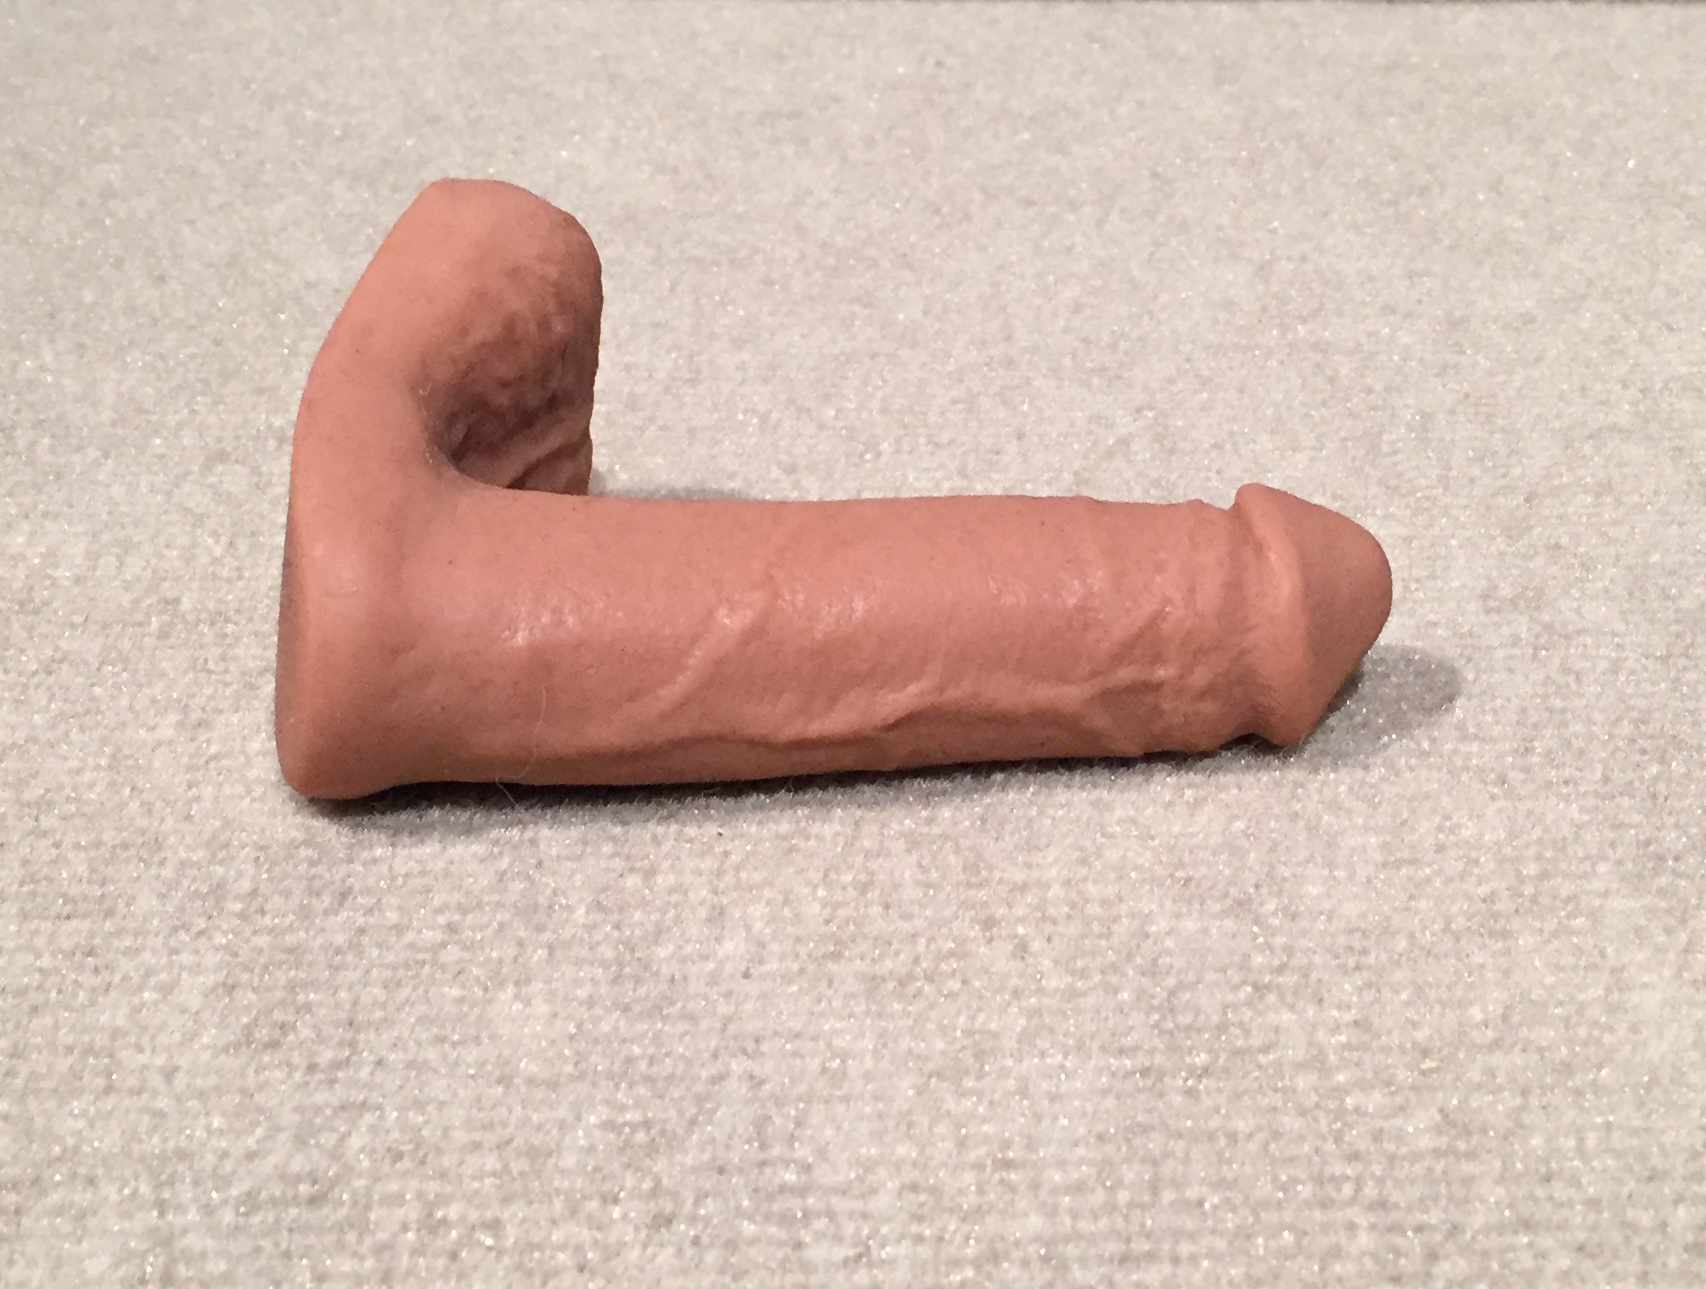 Realistic-looking silicone packer with light-medium skin tone